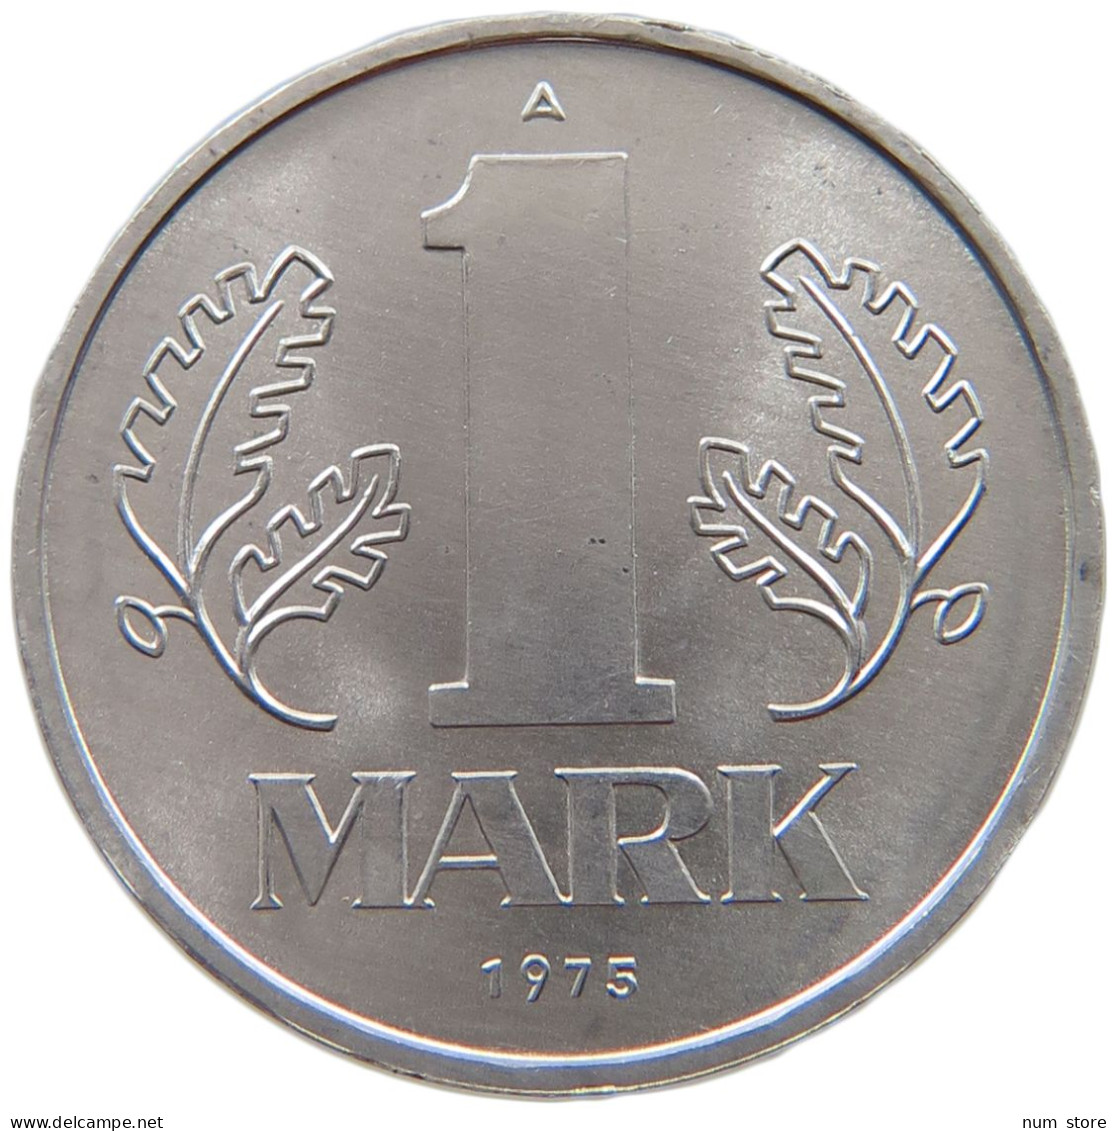 GERMANY DDR 1 MARK 1975 TOP #a076 0279 - 1 Mark